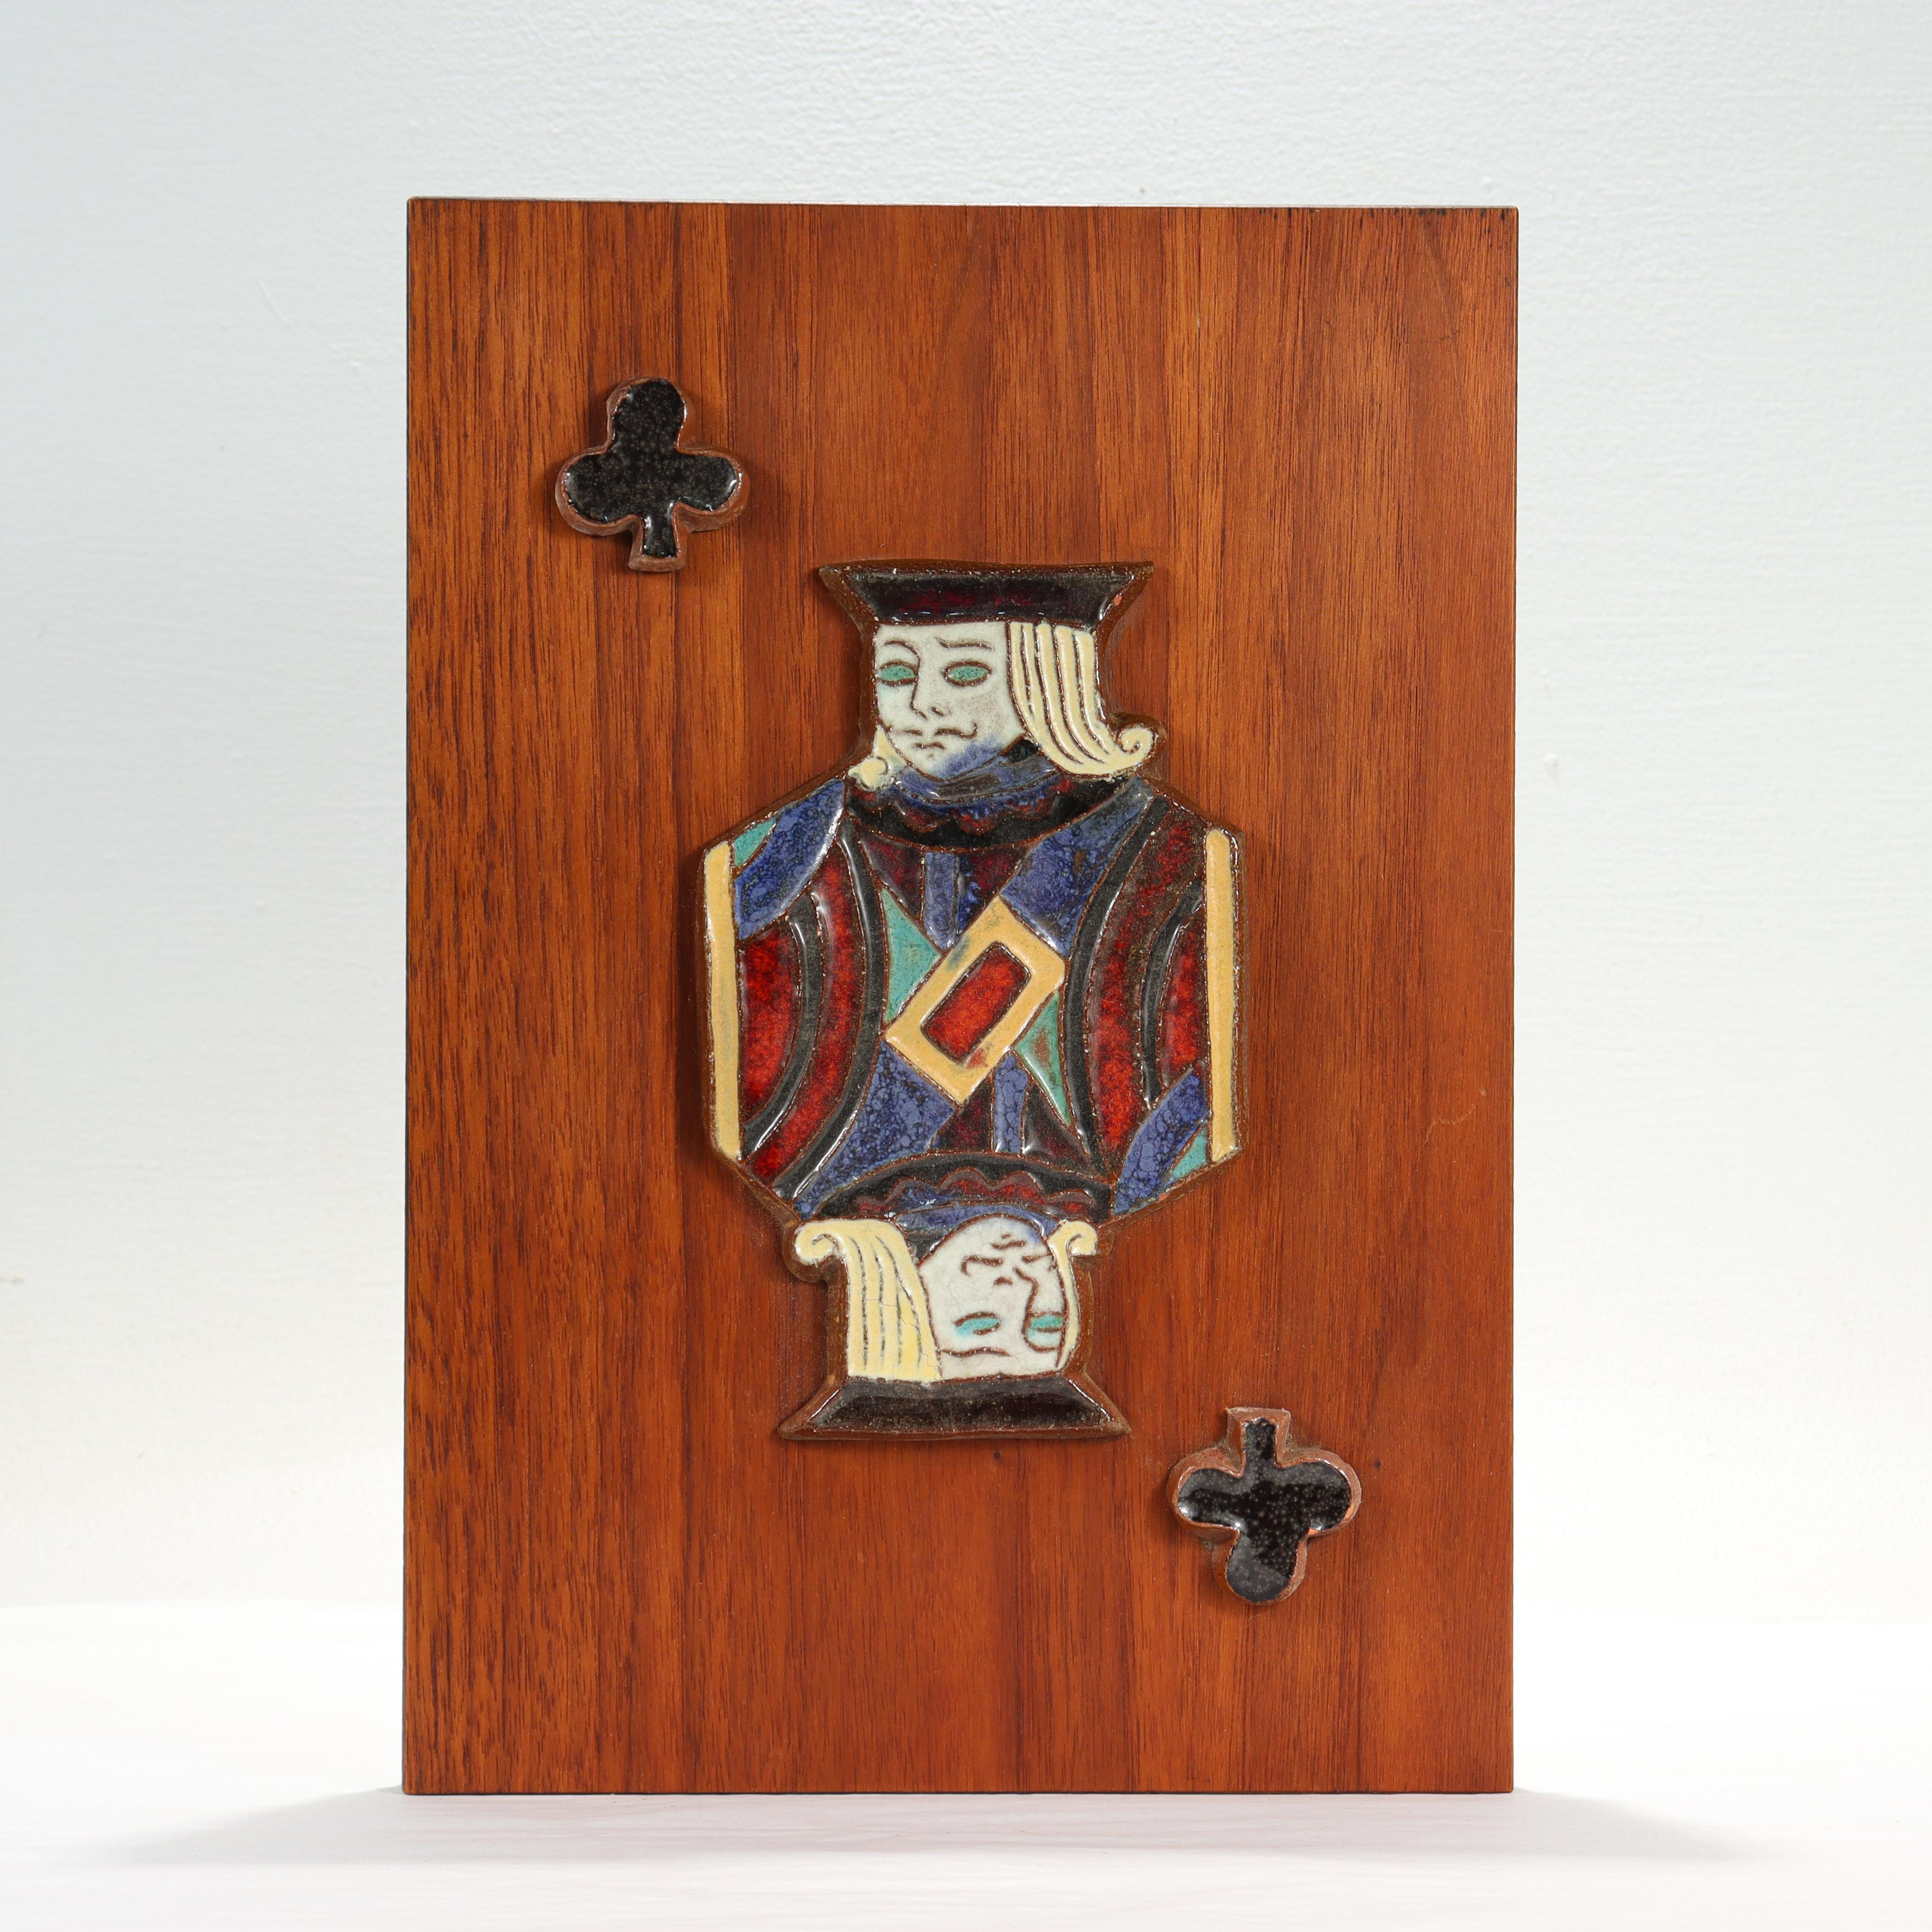 A fine Mid-Century Modern pottery tile.

By Harris Strong. 

With a terracotta pottery tile depicting the Jack of Clubs mounted on a teak veneered panel.

Simply a great tile for any fan of card games!

Date:
Mid-20th Century

Overall Condition:
It